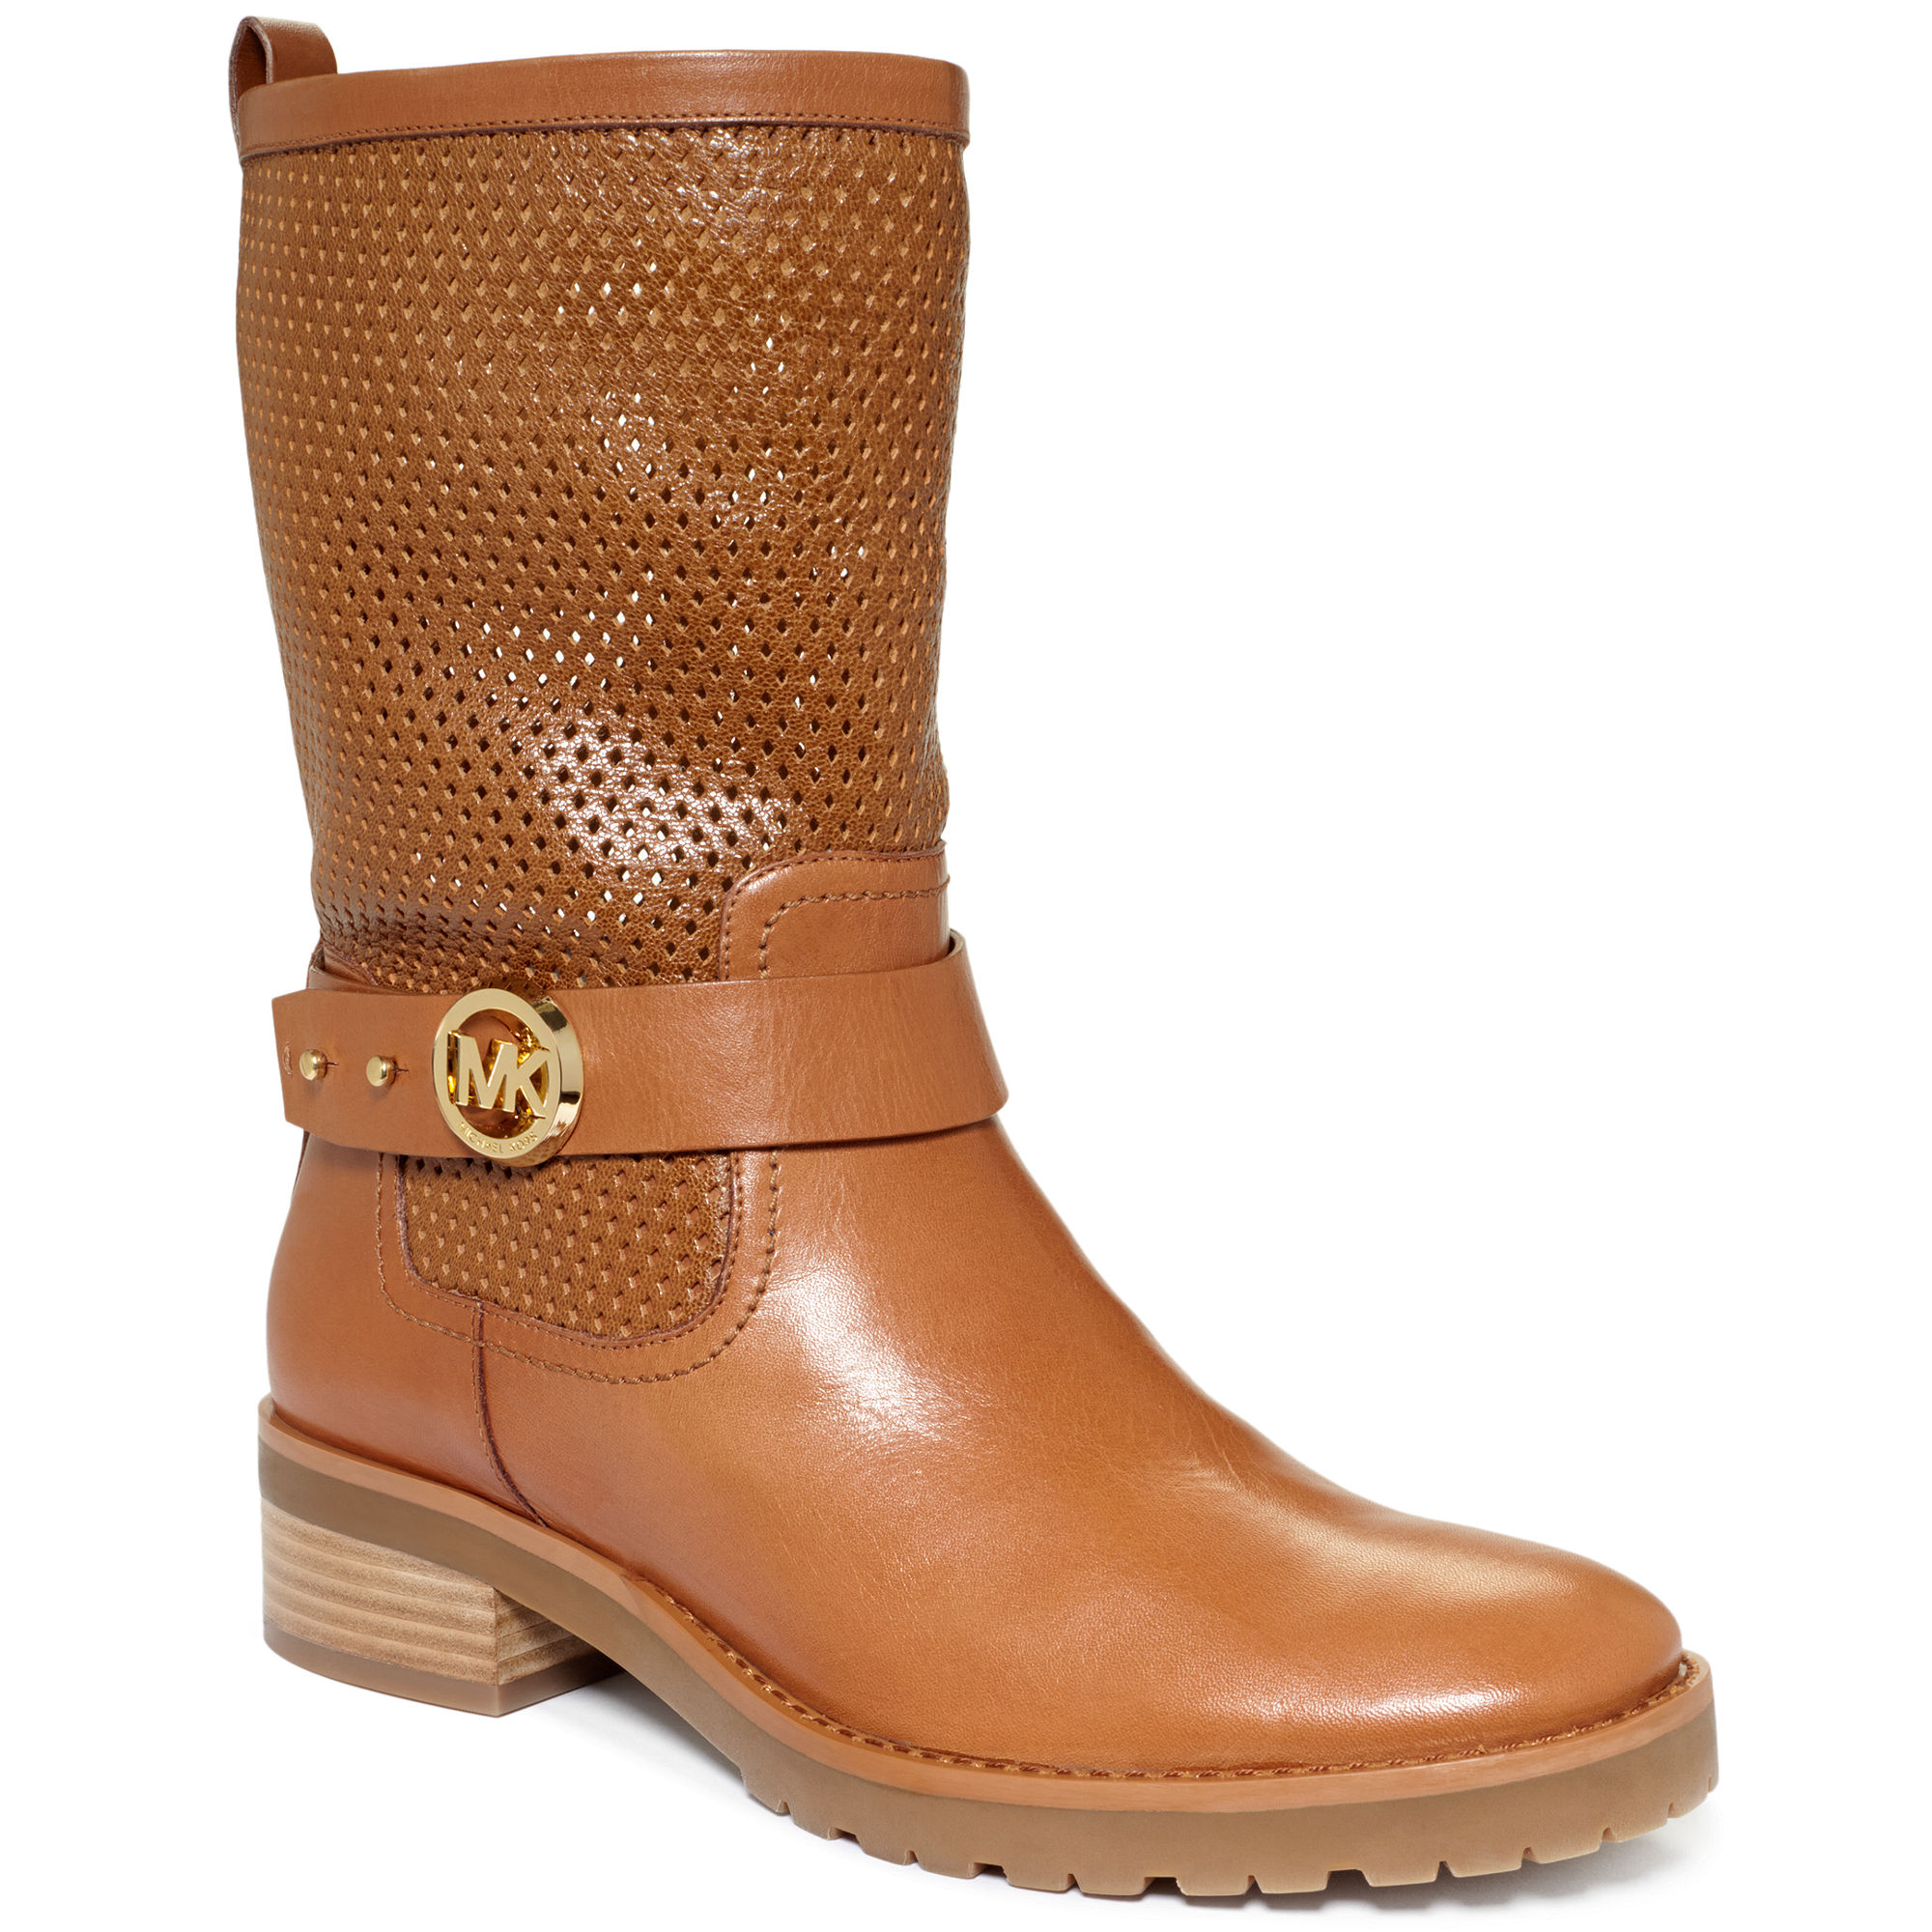 Michael kors Daria Flat Boots in Brown (Luggage Leather) | Lyst